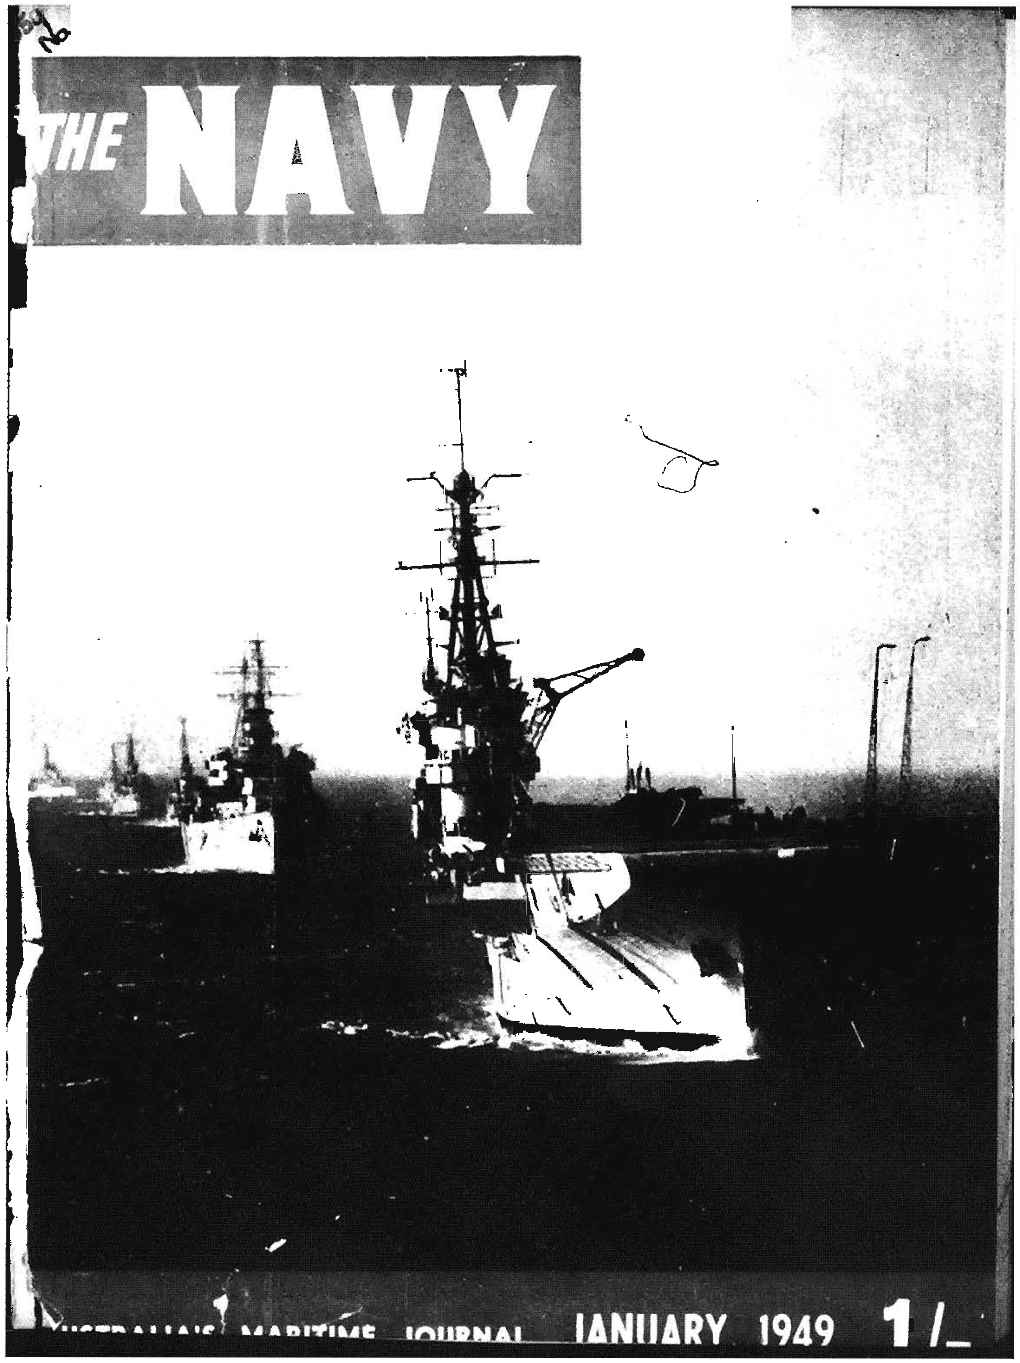 *-*».*.Ue .Nubmal JANUARY 1949 NAVY CONTENTS the UNITED SHIP SERVICES Vol